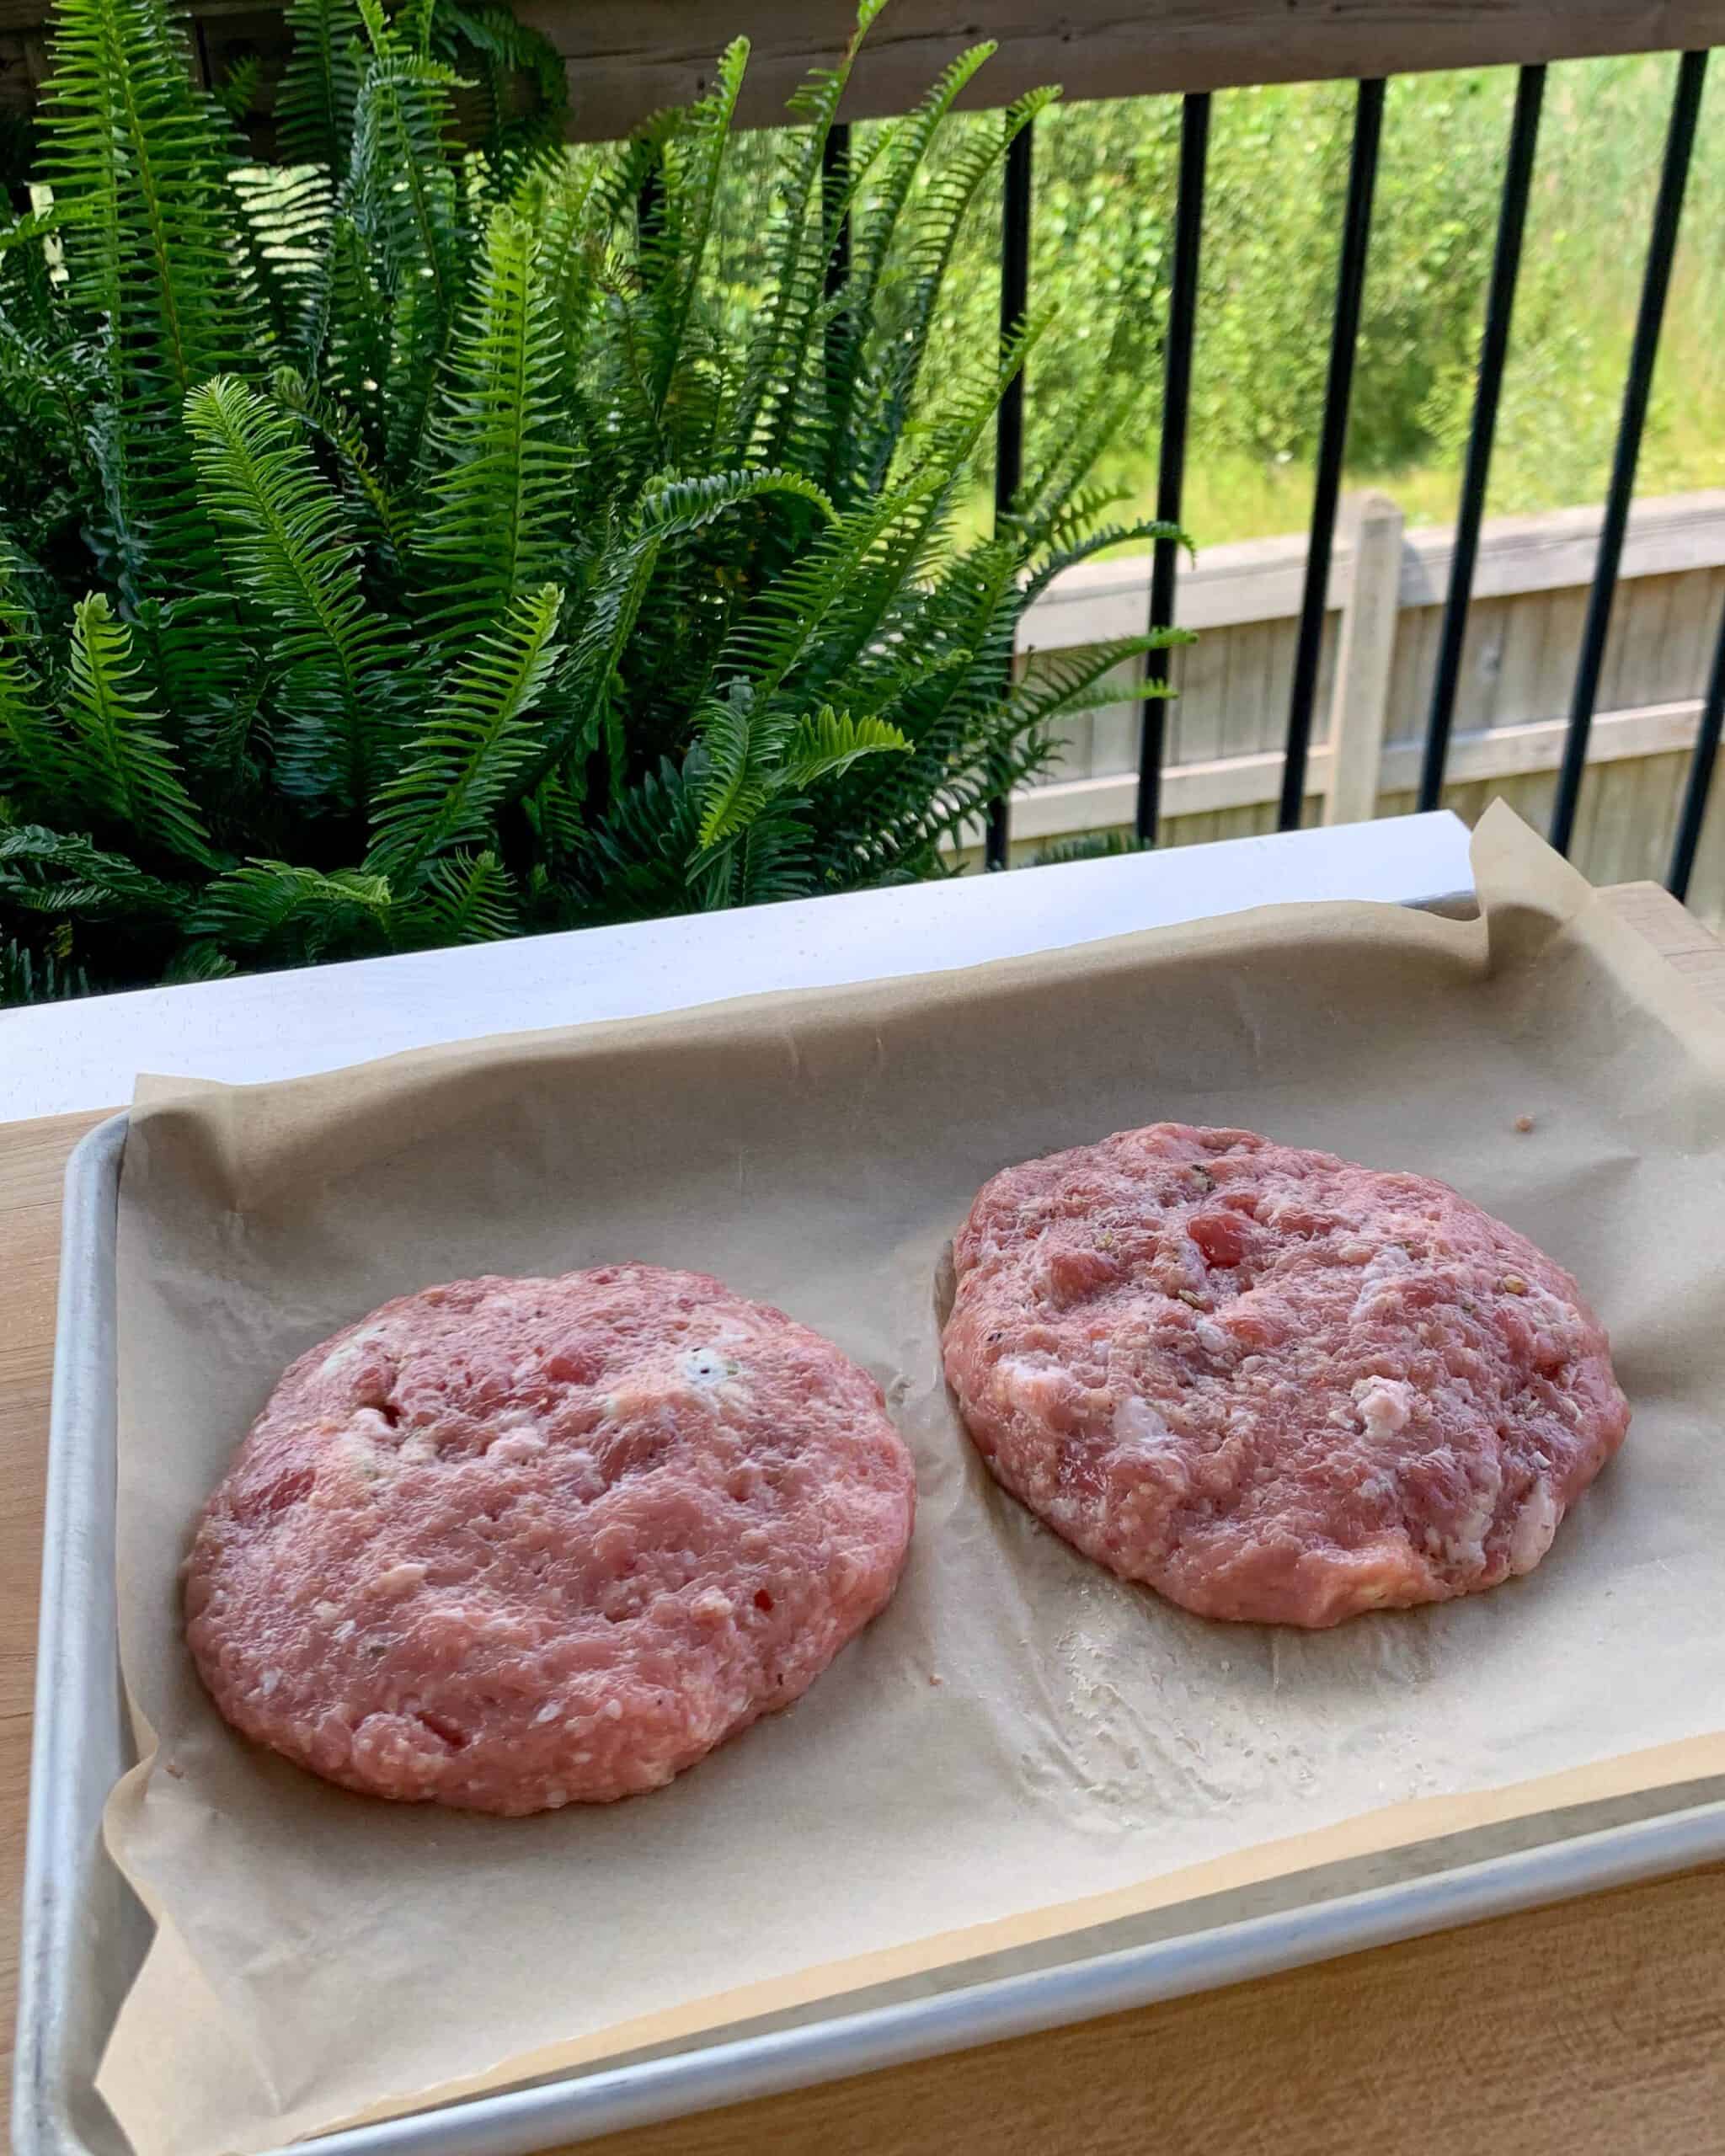 Two turkey patties on a tray ready to be grilled.